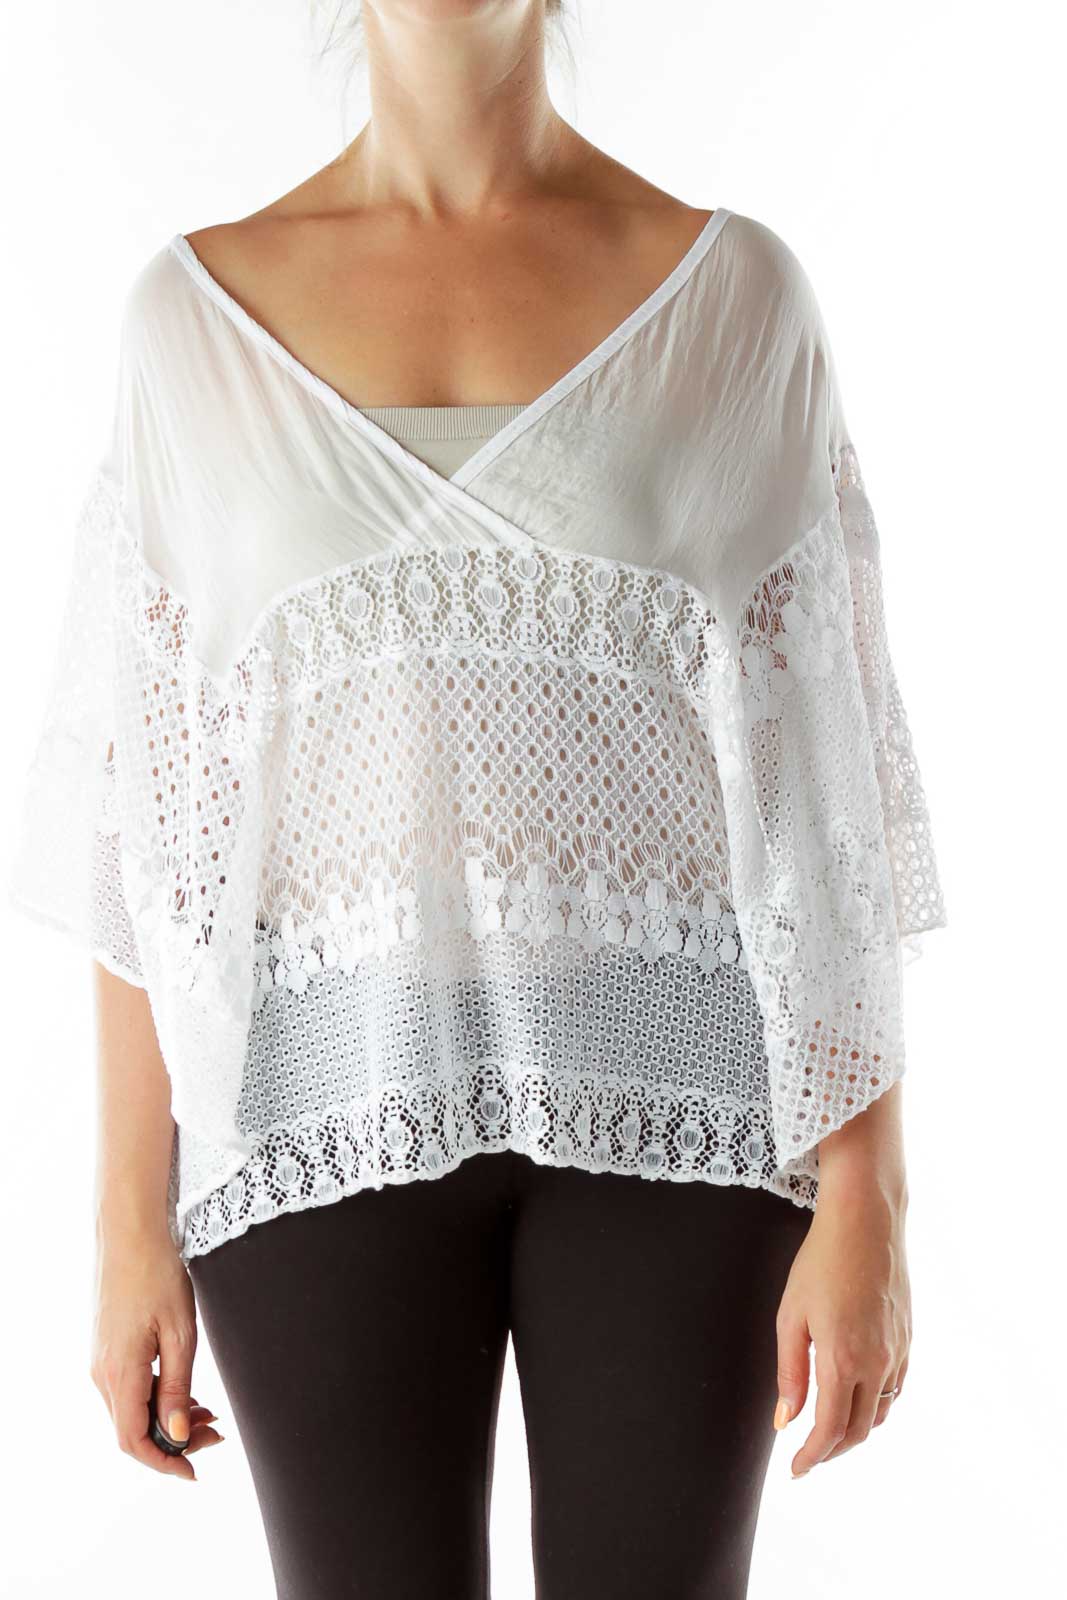 White Crocheted Top Front